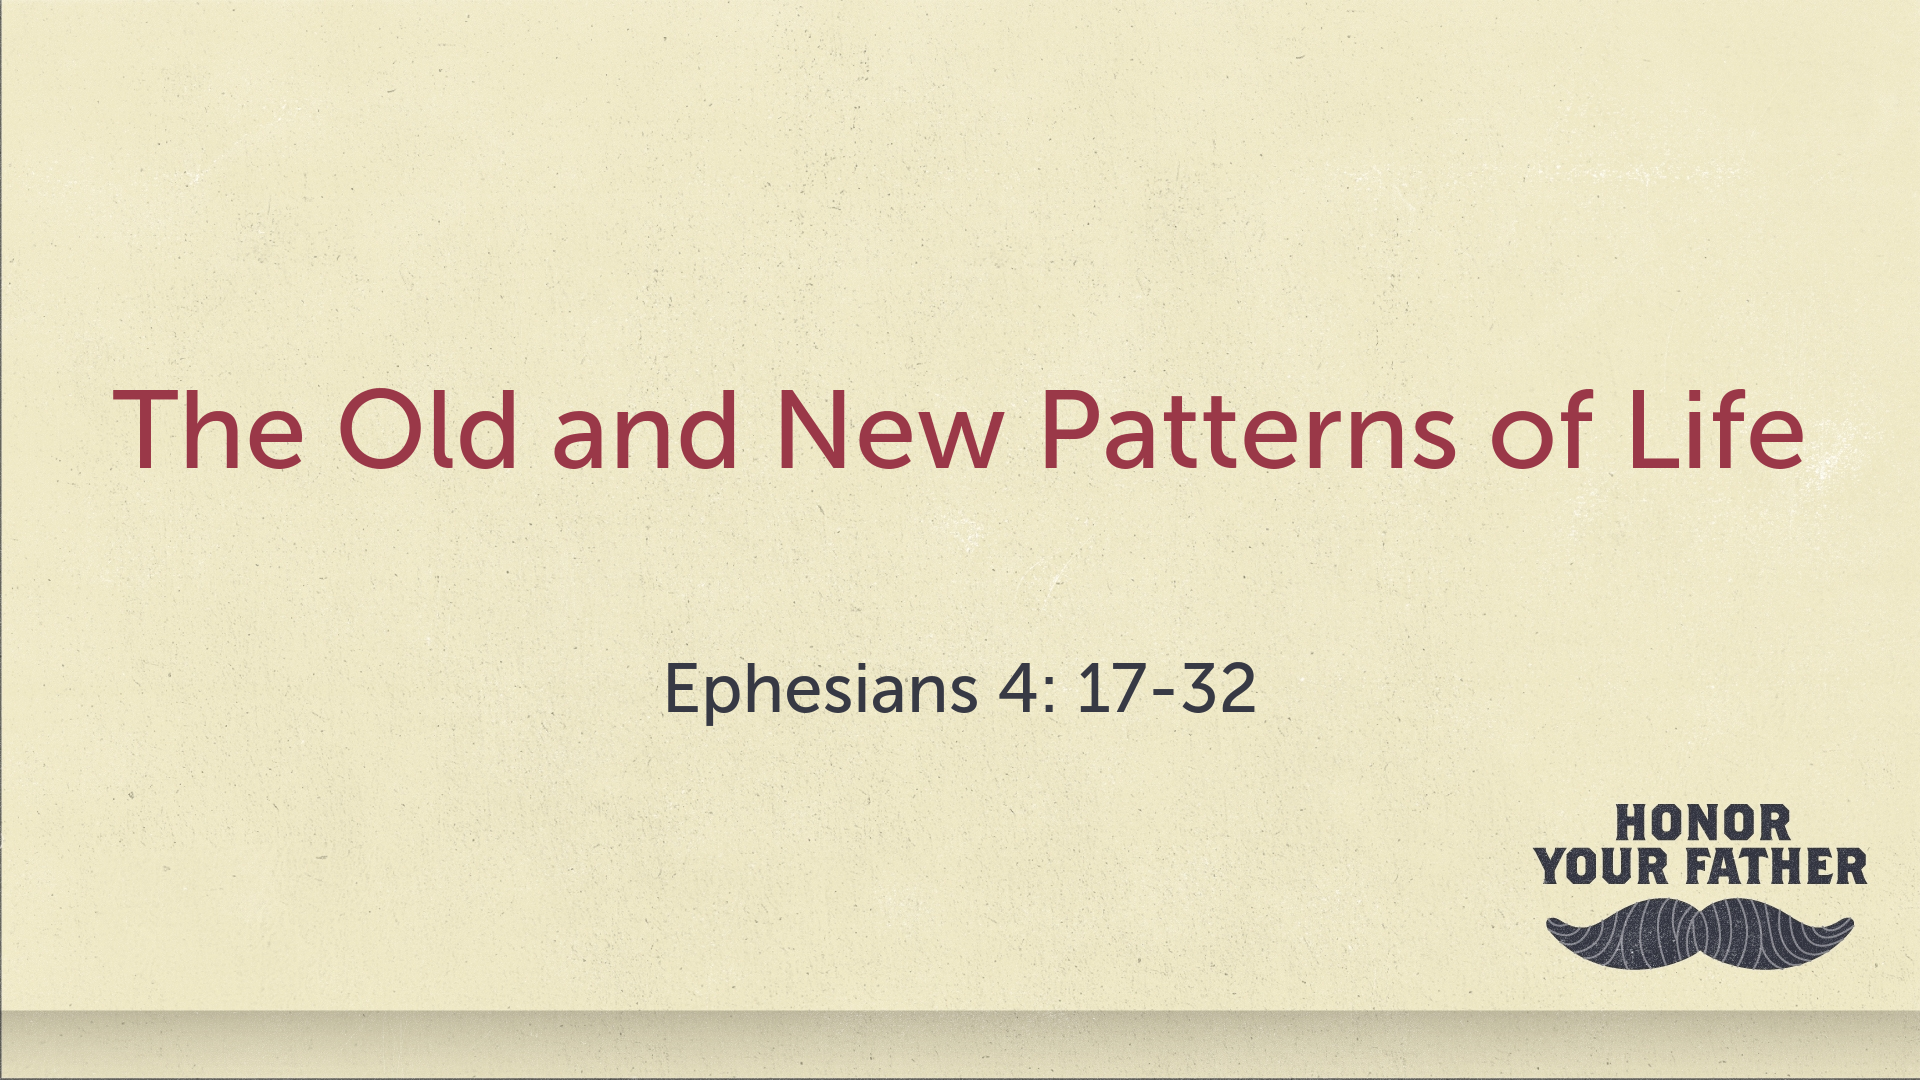 Jun 20, 2021 - The Old and New Patterns of Life (Video) Ephesians 4: 17-32